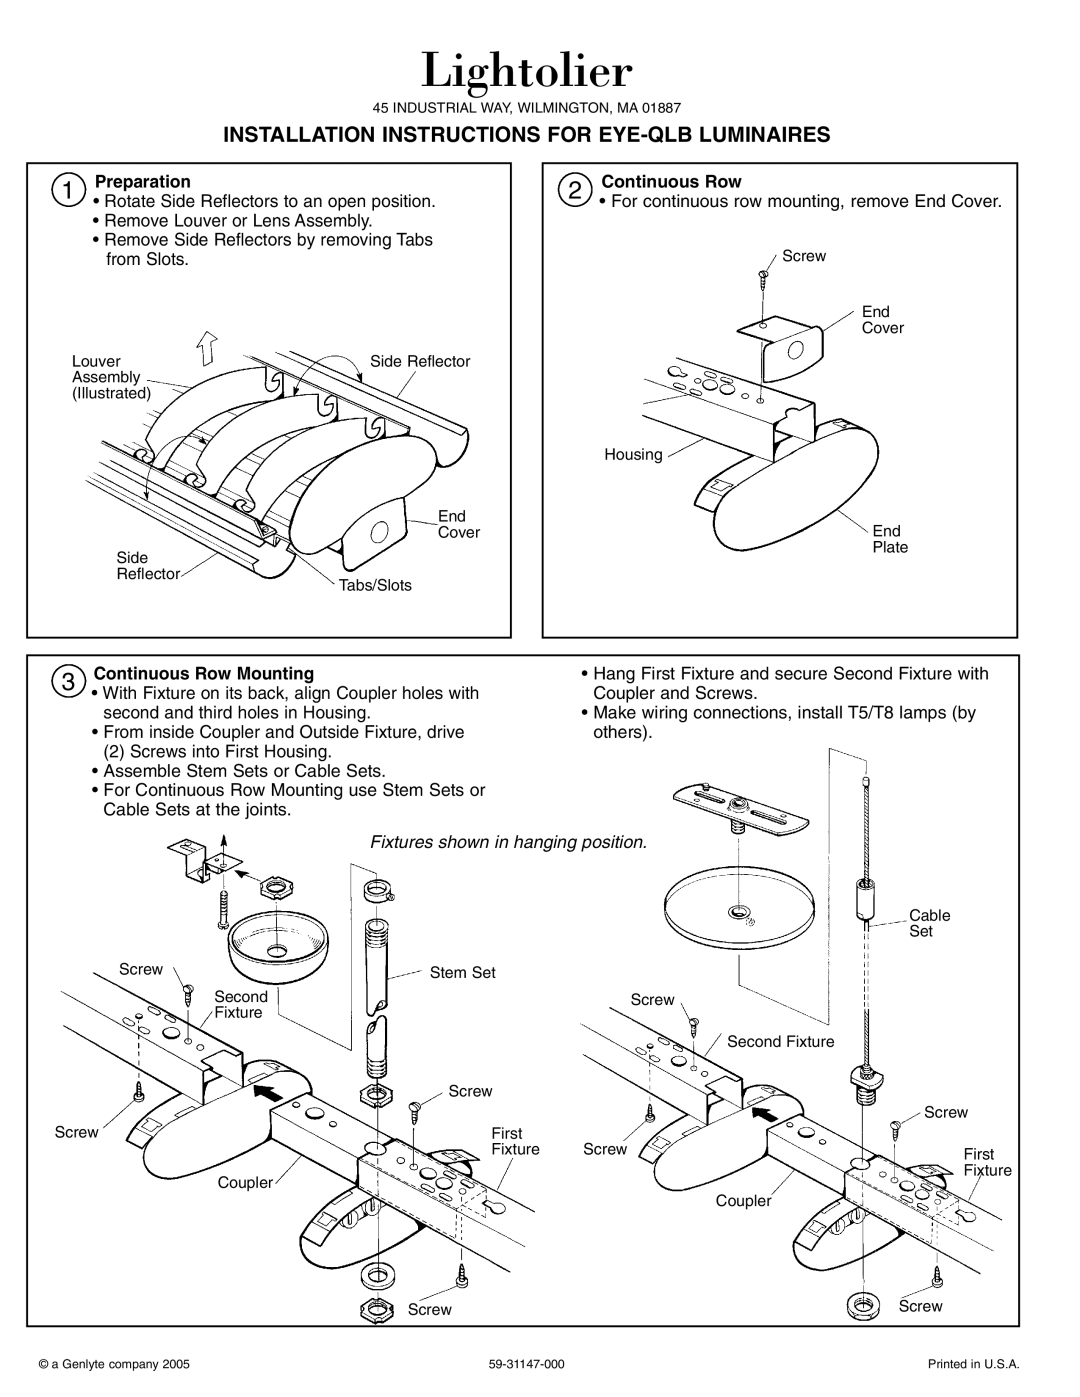 Lightolier Eye-QLB installation instructions Preparation, Continuous Row Mounting, Lightolier 